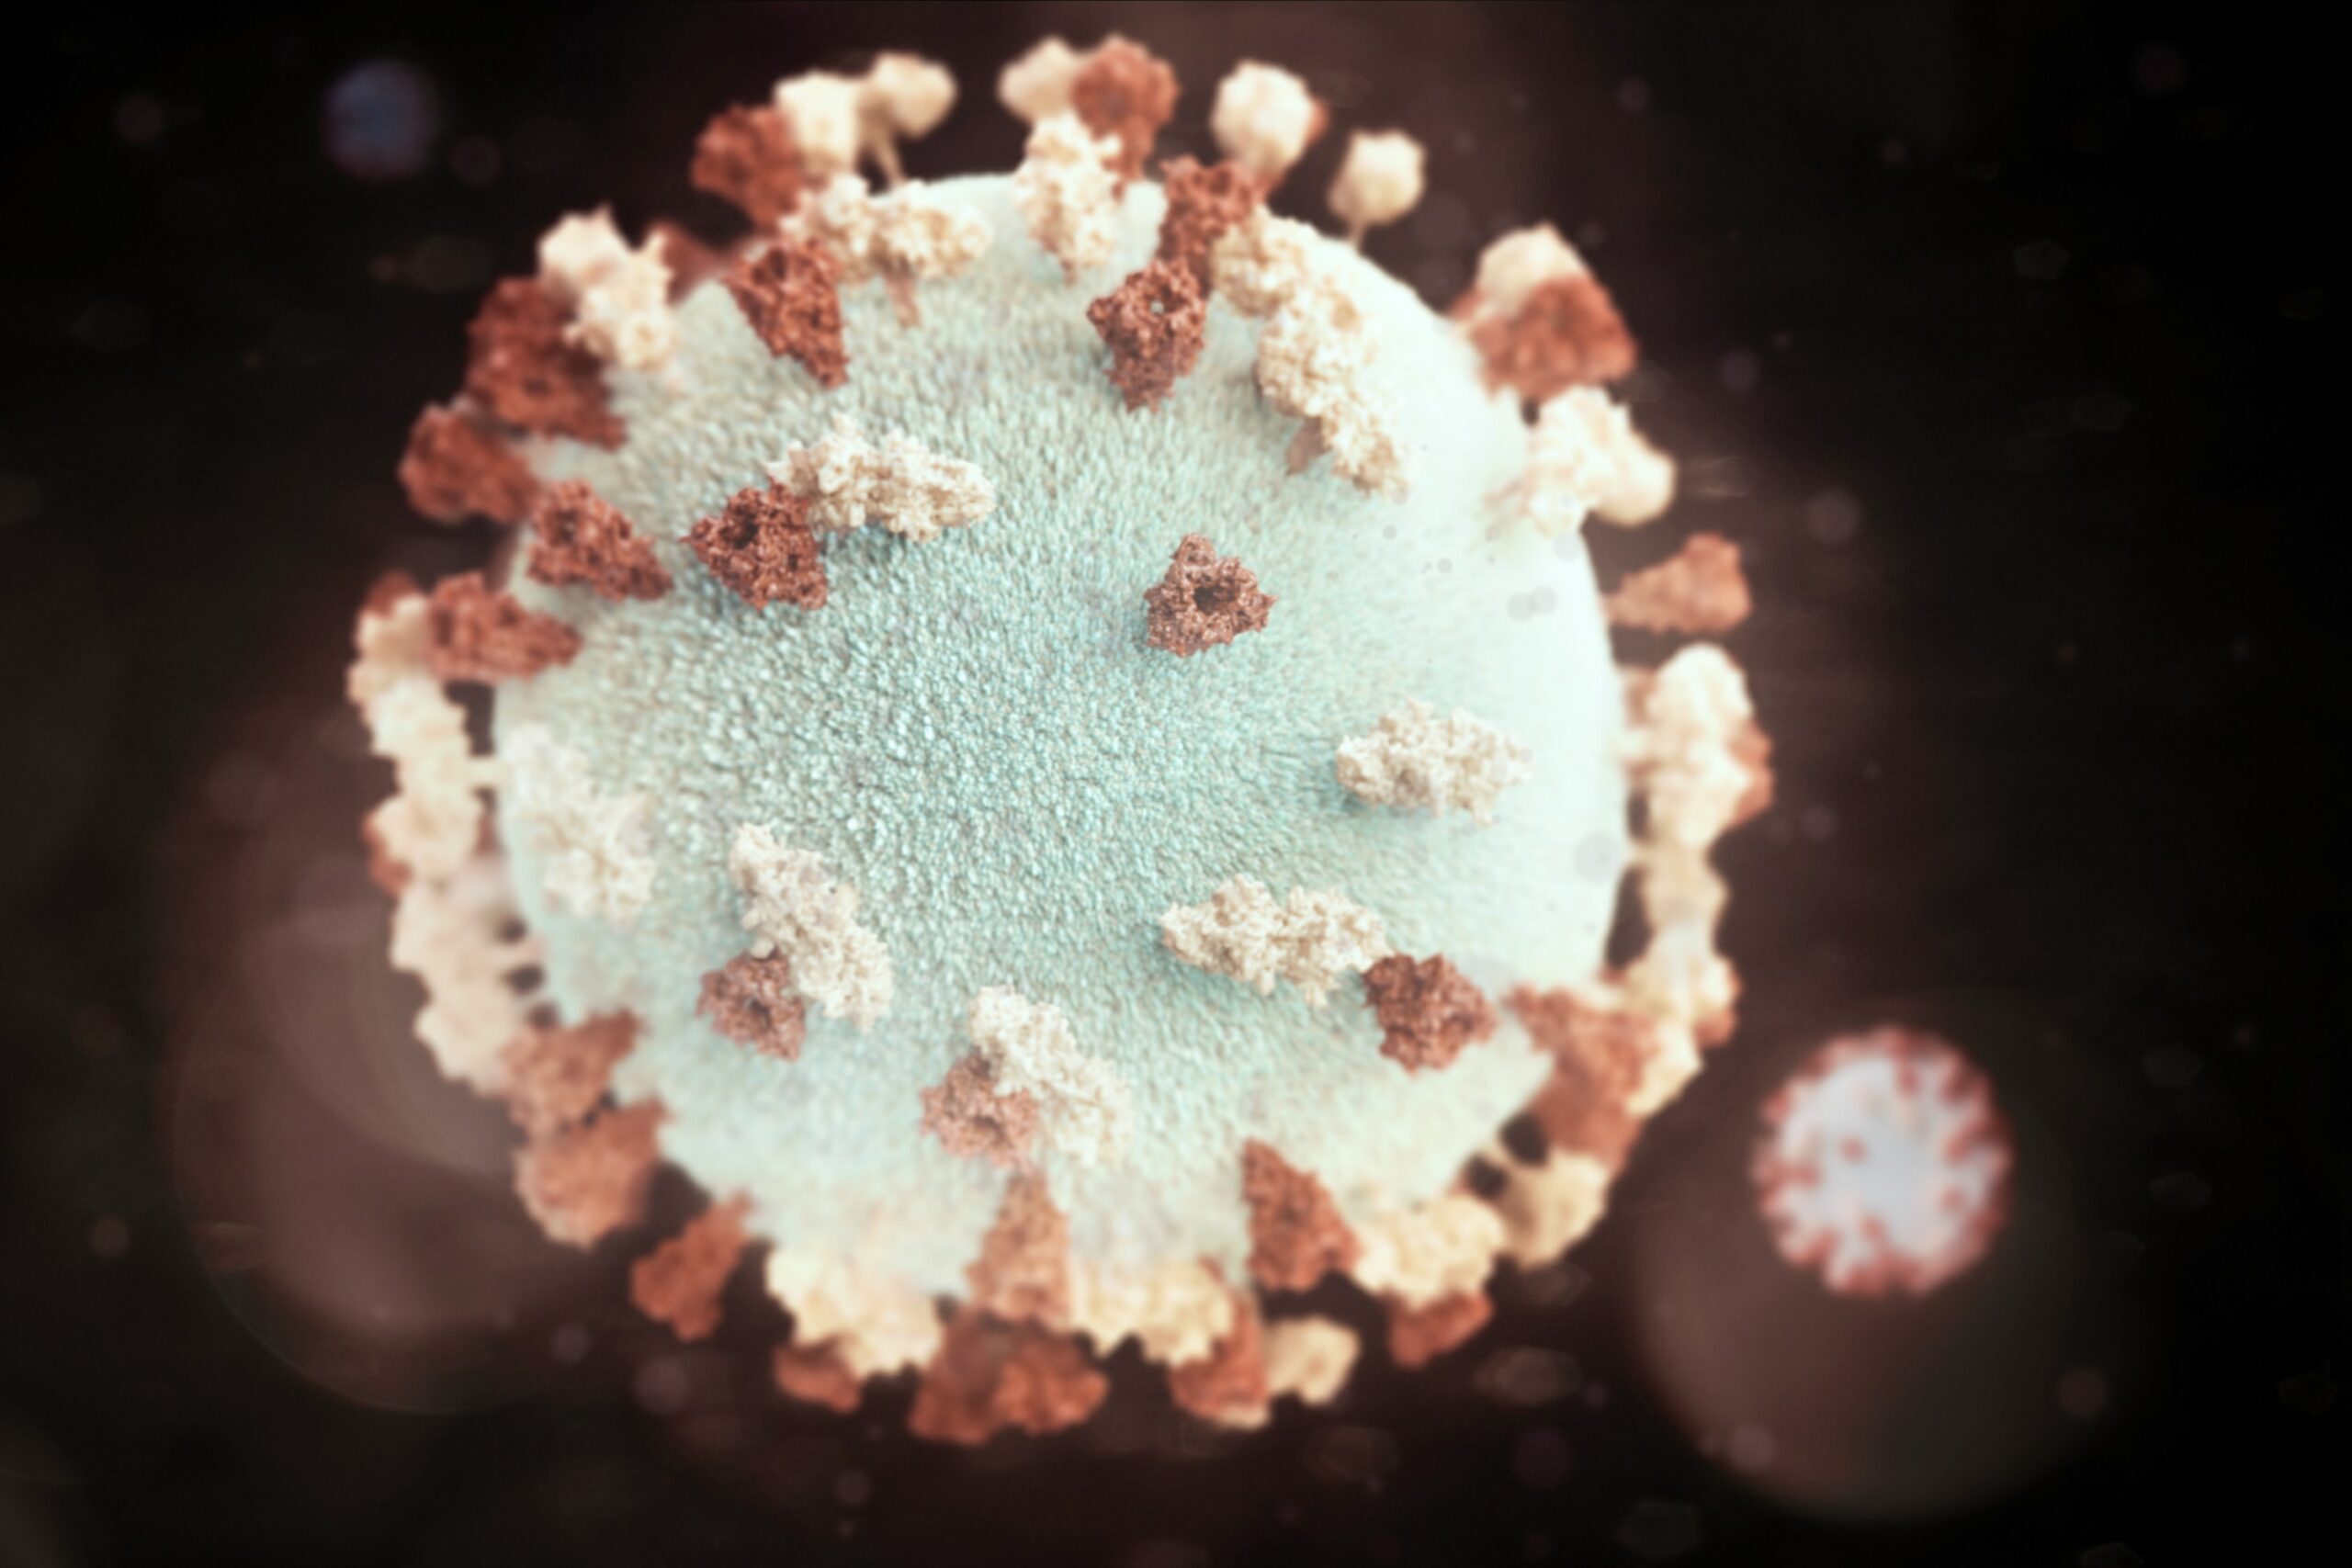 A close-up 3D representation of a round, fluffy virus particle.